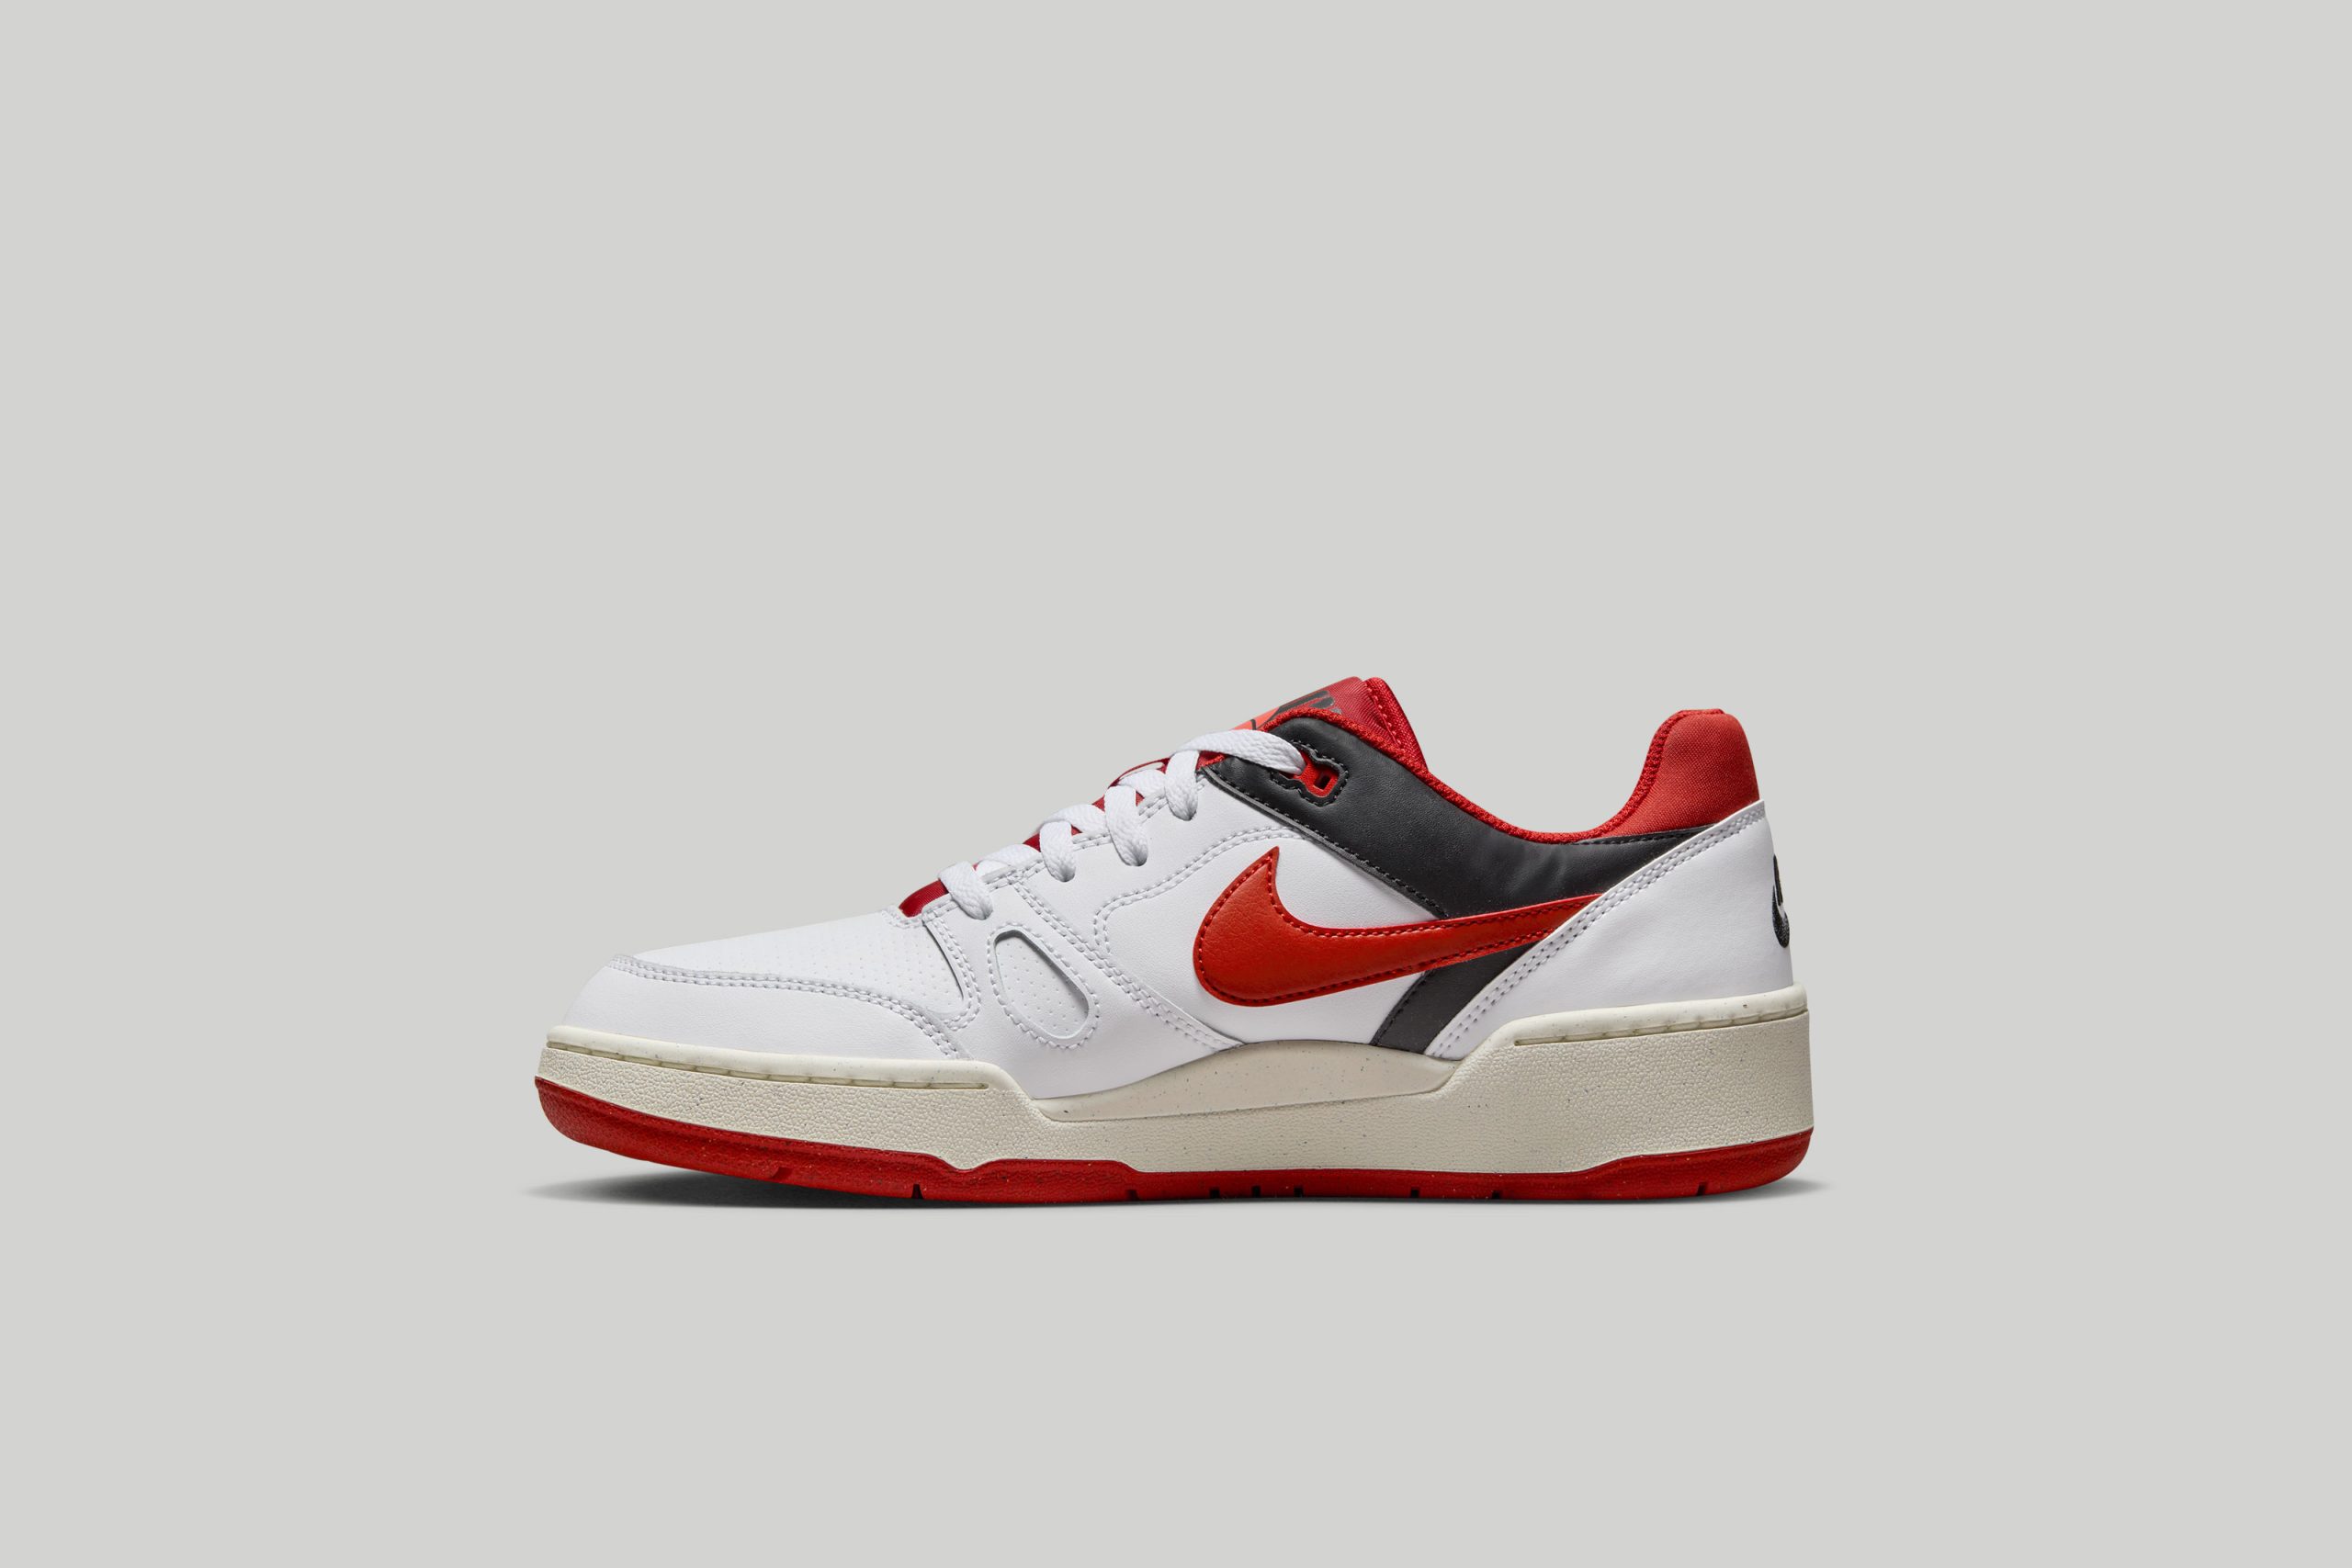 Nike Full Force Low "University Red"